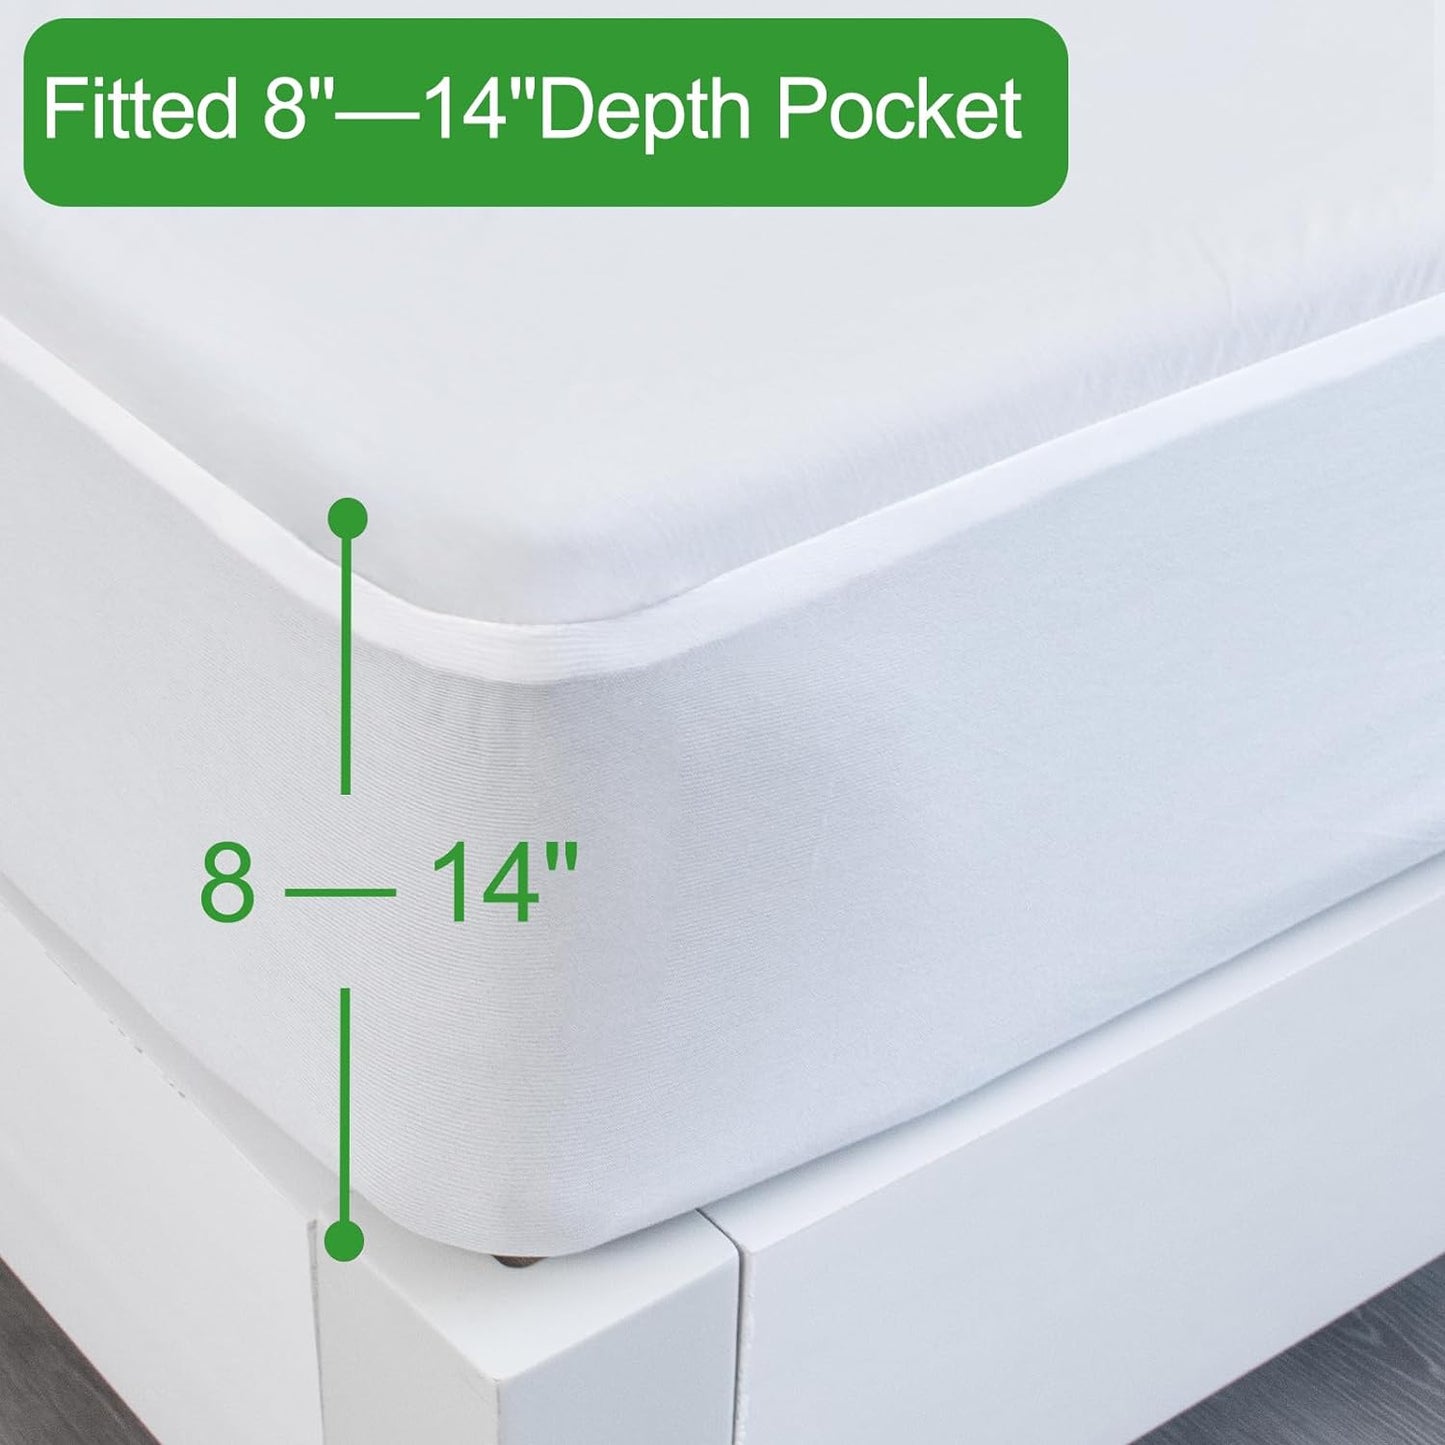 Waterproof Mattress Protector Twin & Full Size, Premium Bamboo Mattress Pad Cover Fitted with Deep Pocket Up to 14" Depth